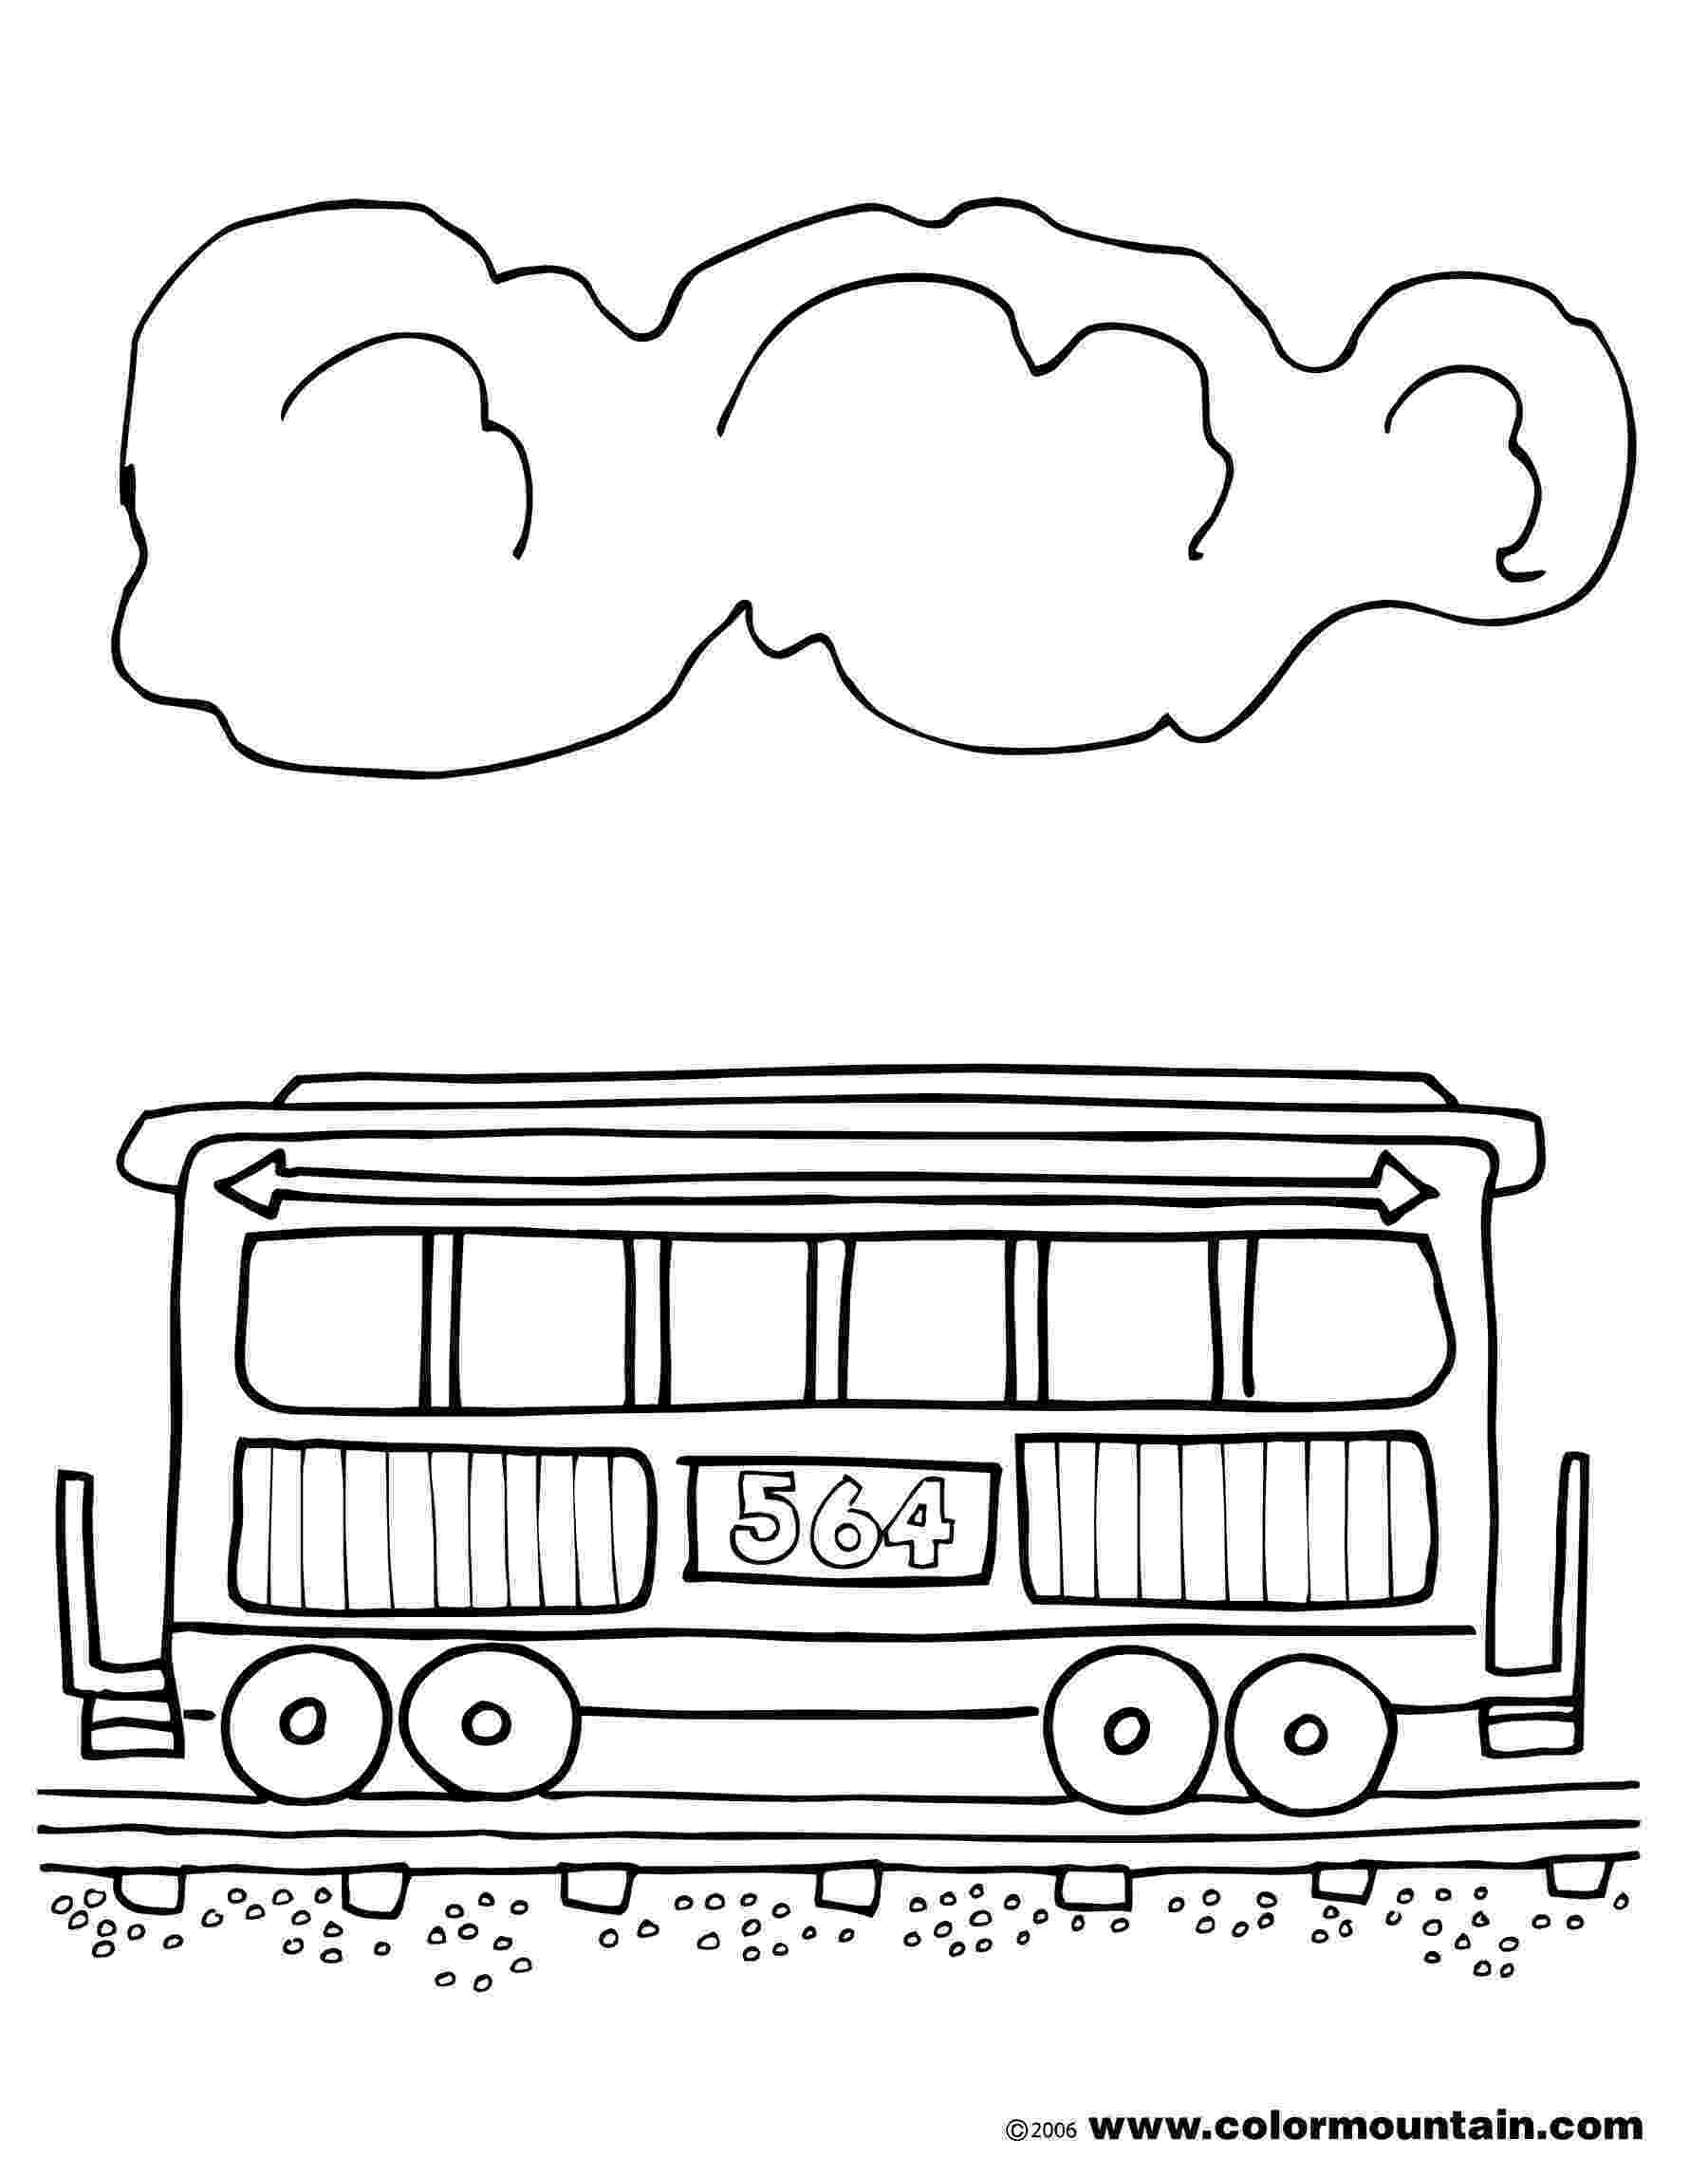 train car coloring pages train car coloring sheet create a printout or activity car pages coloring train 